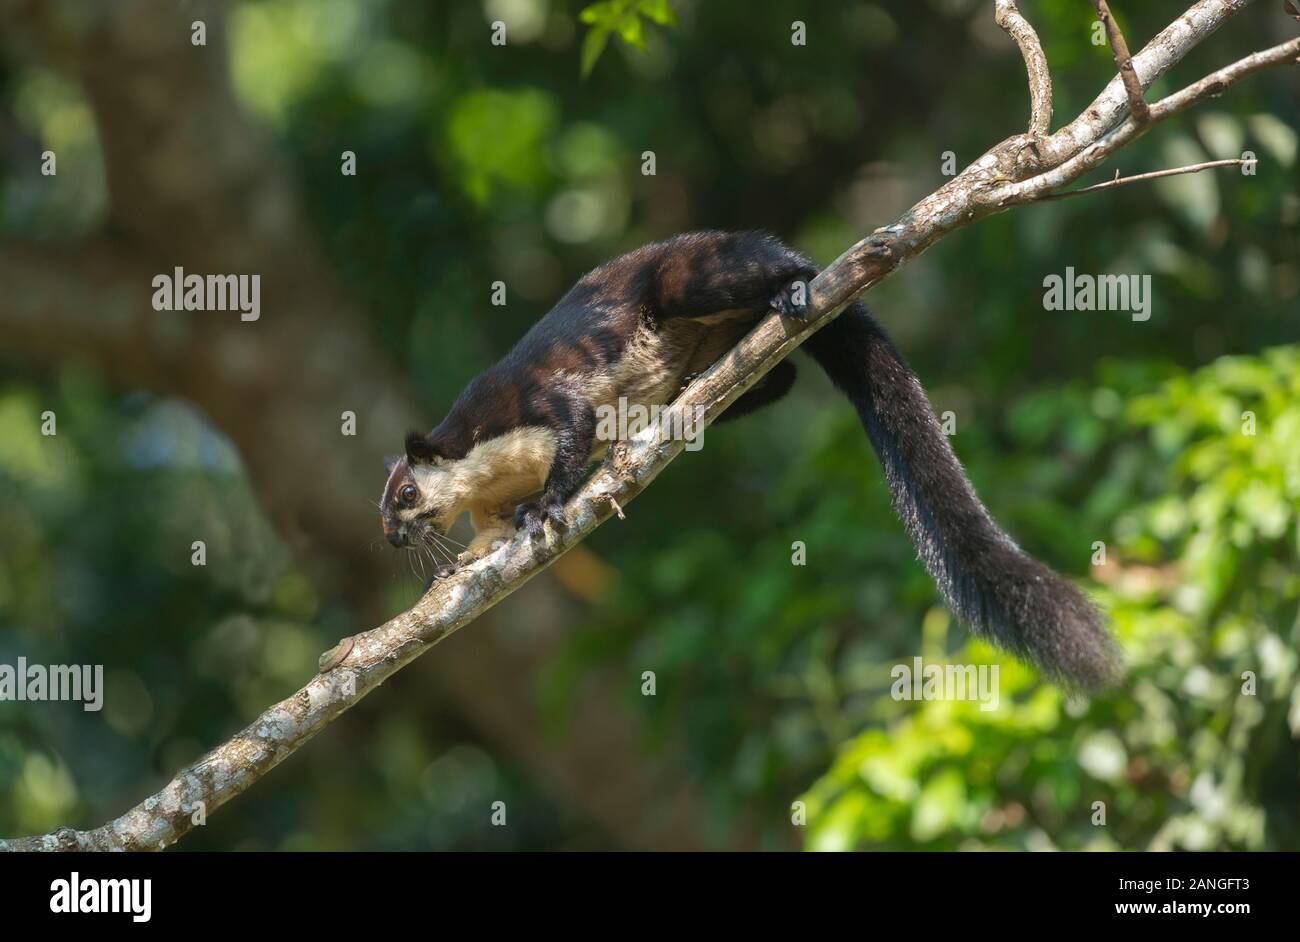 The black giant squirrel or Malayan giant squirrel, Ratufa bicolor, Assam, India Stock Photo